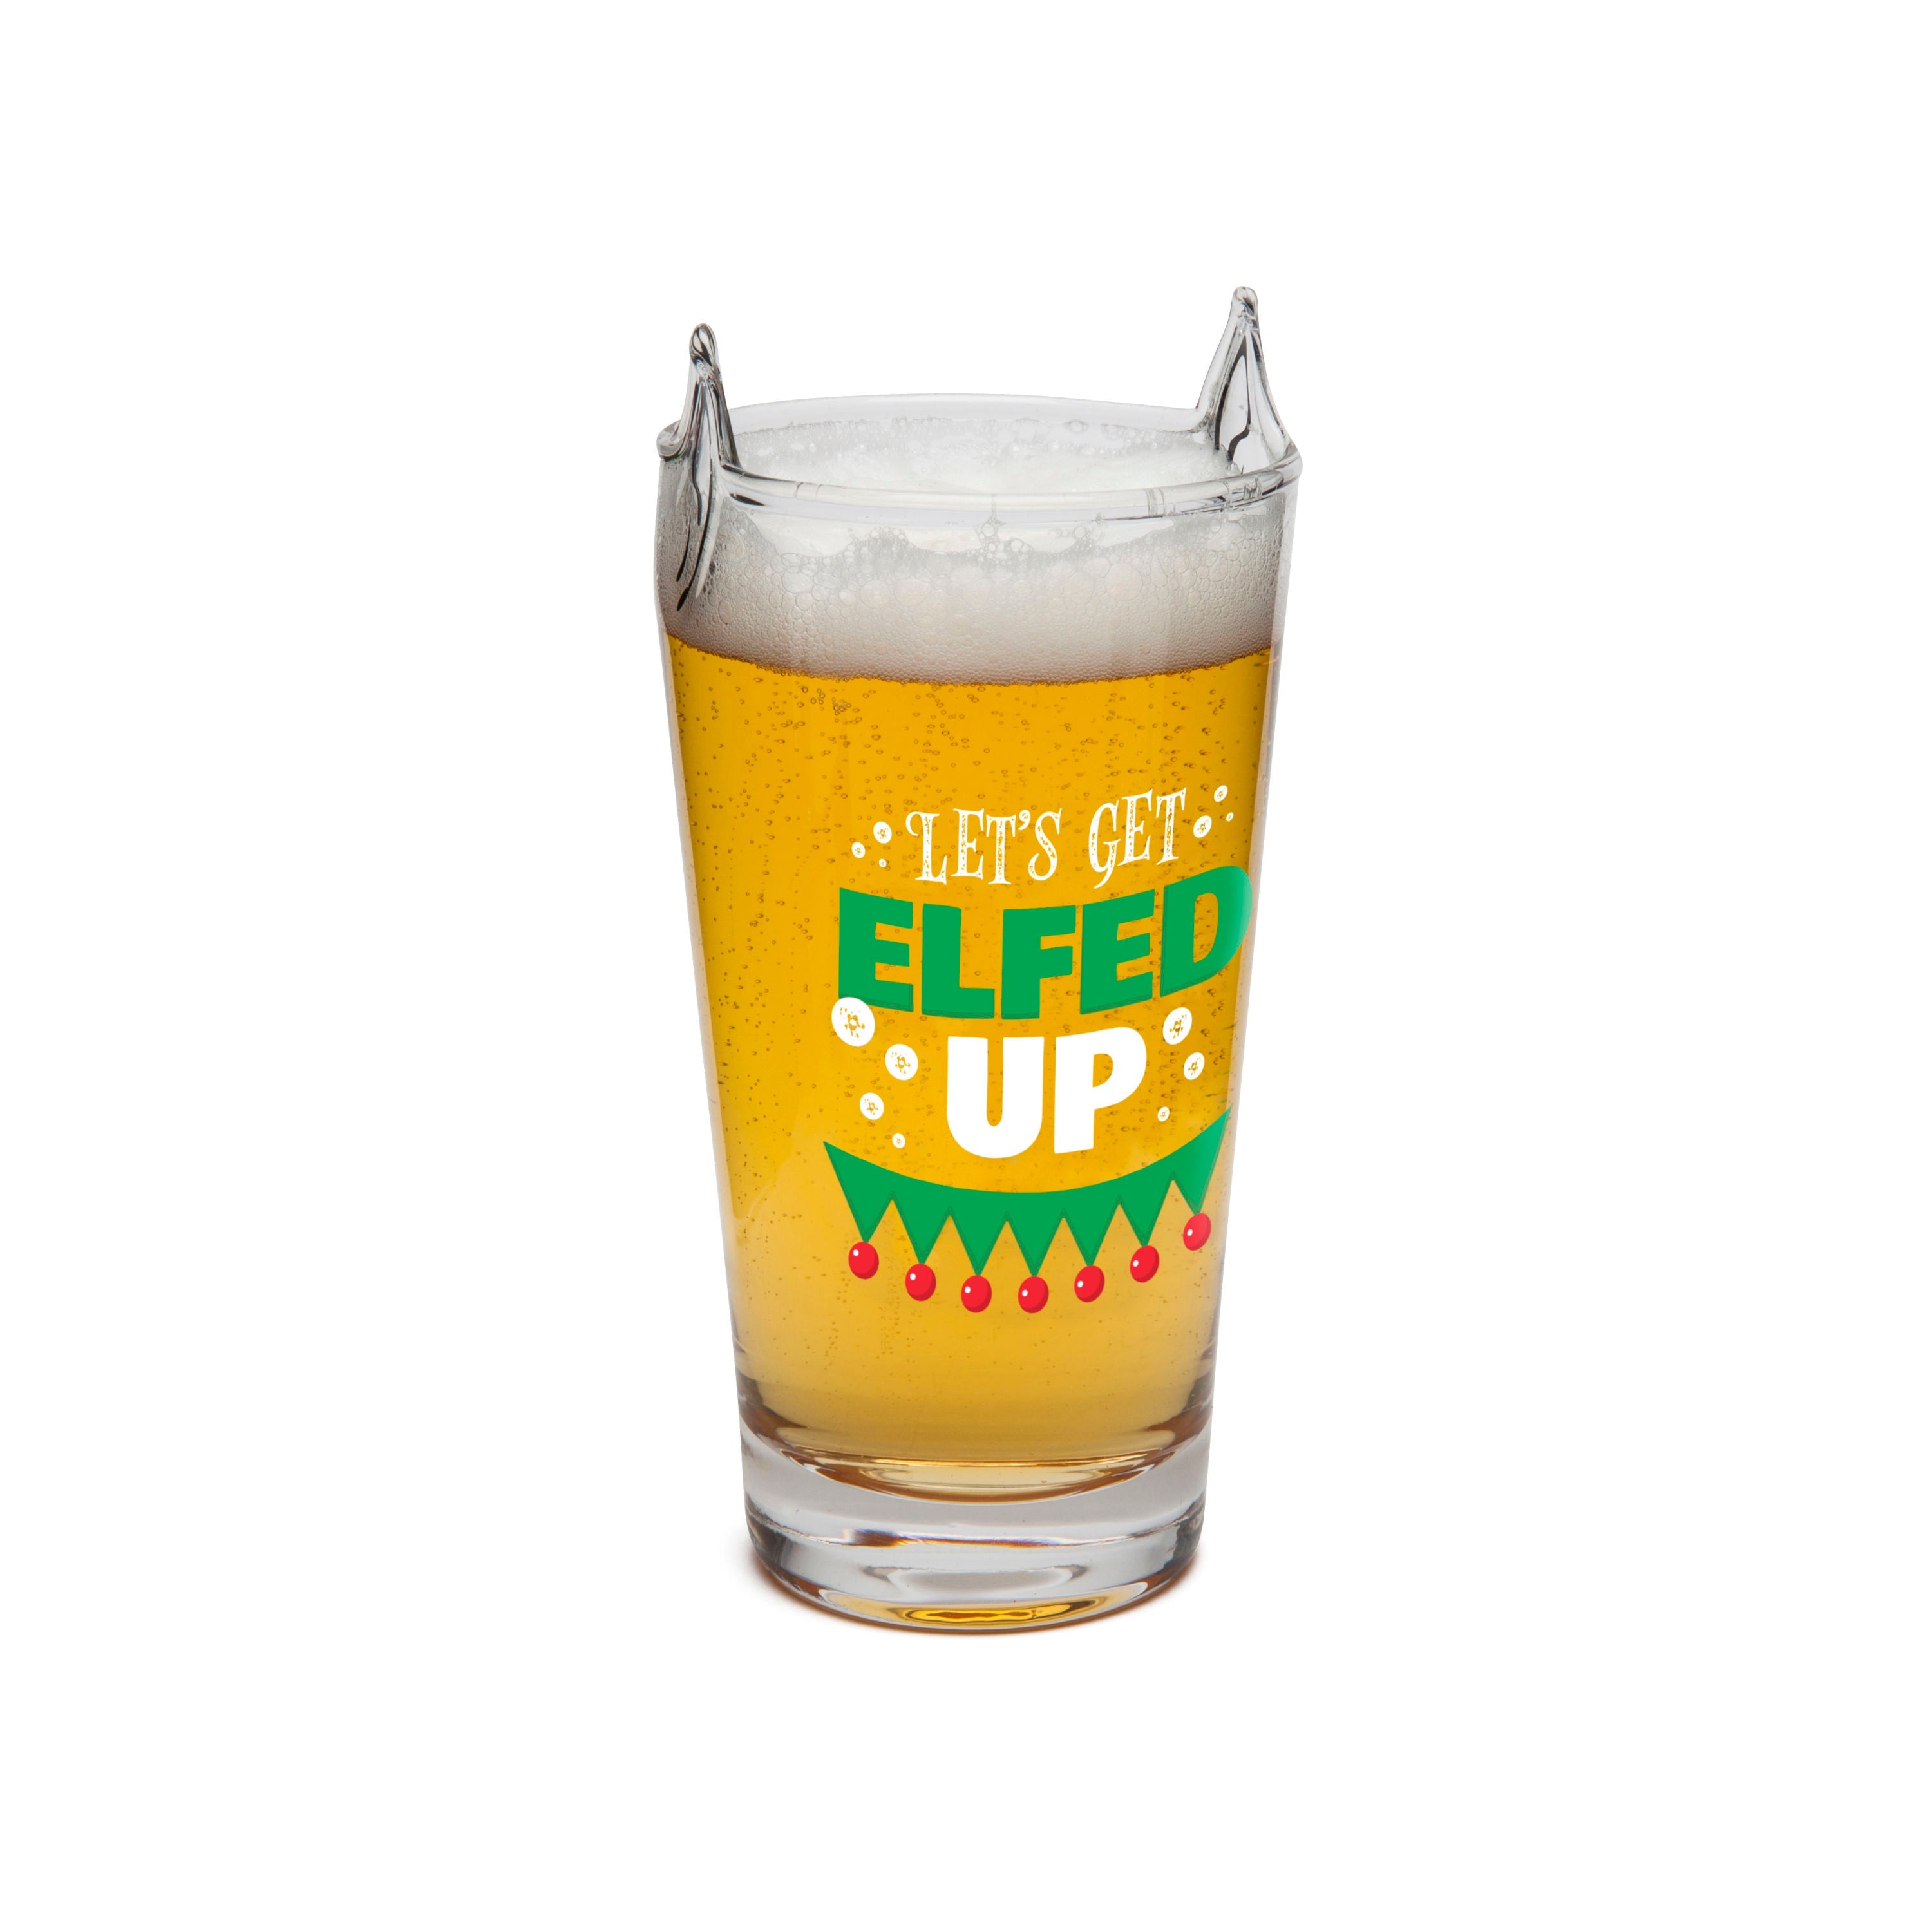 The Elfed Up Pint Glass